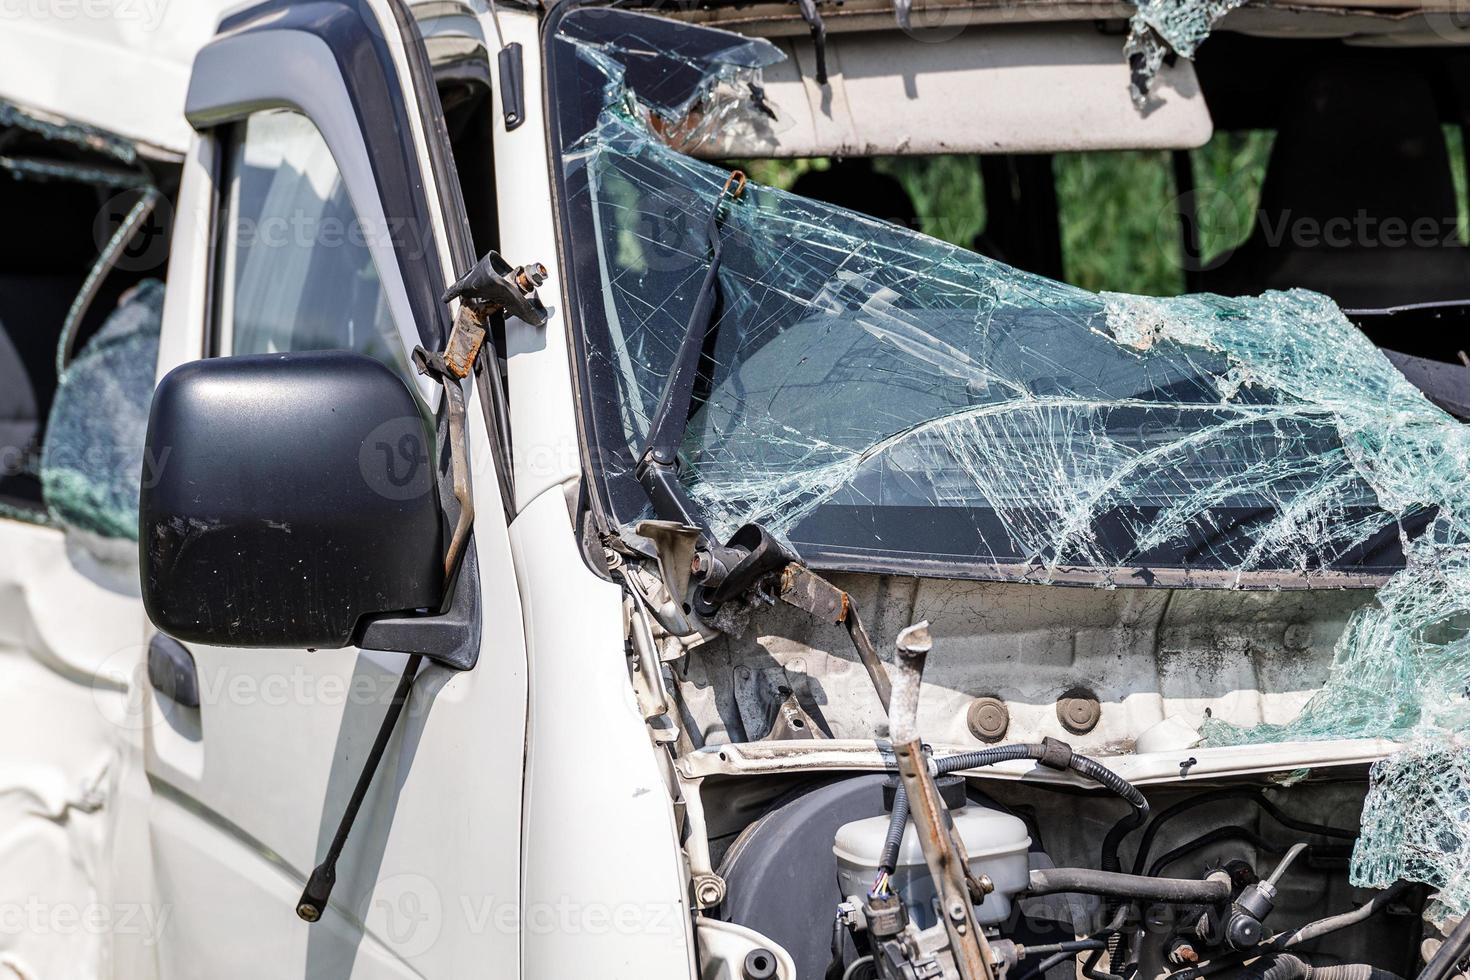 Details of the smashed minivan after serious car accident photo